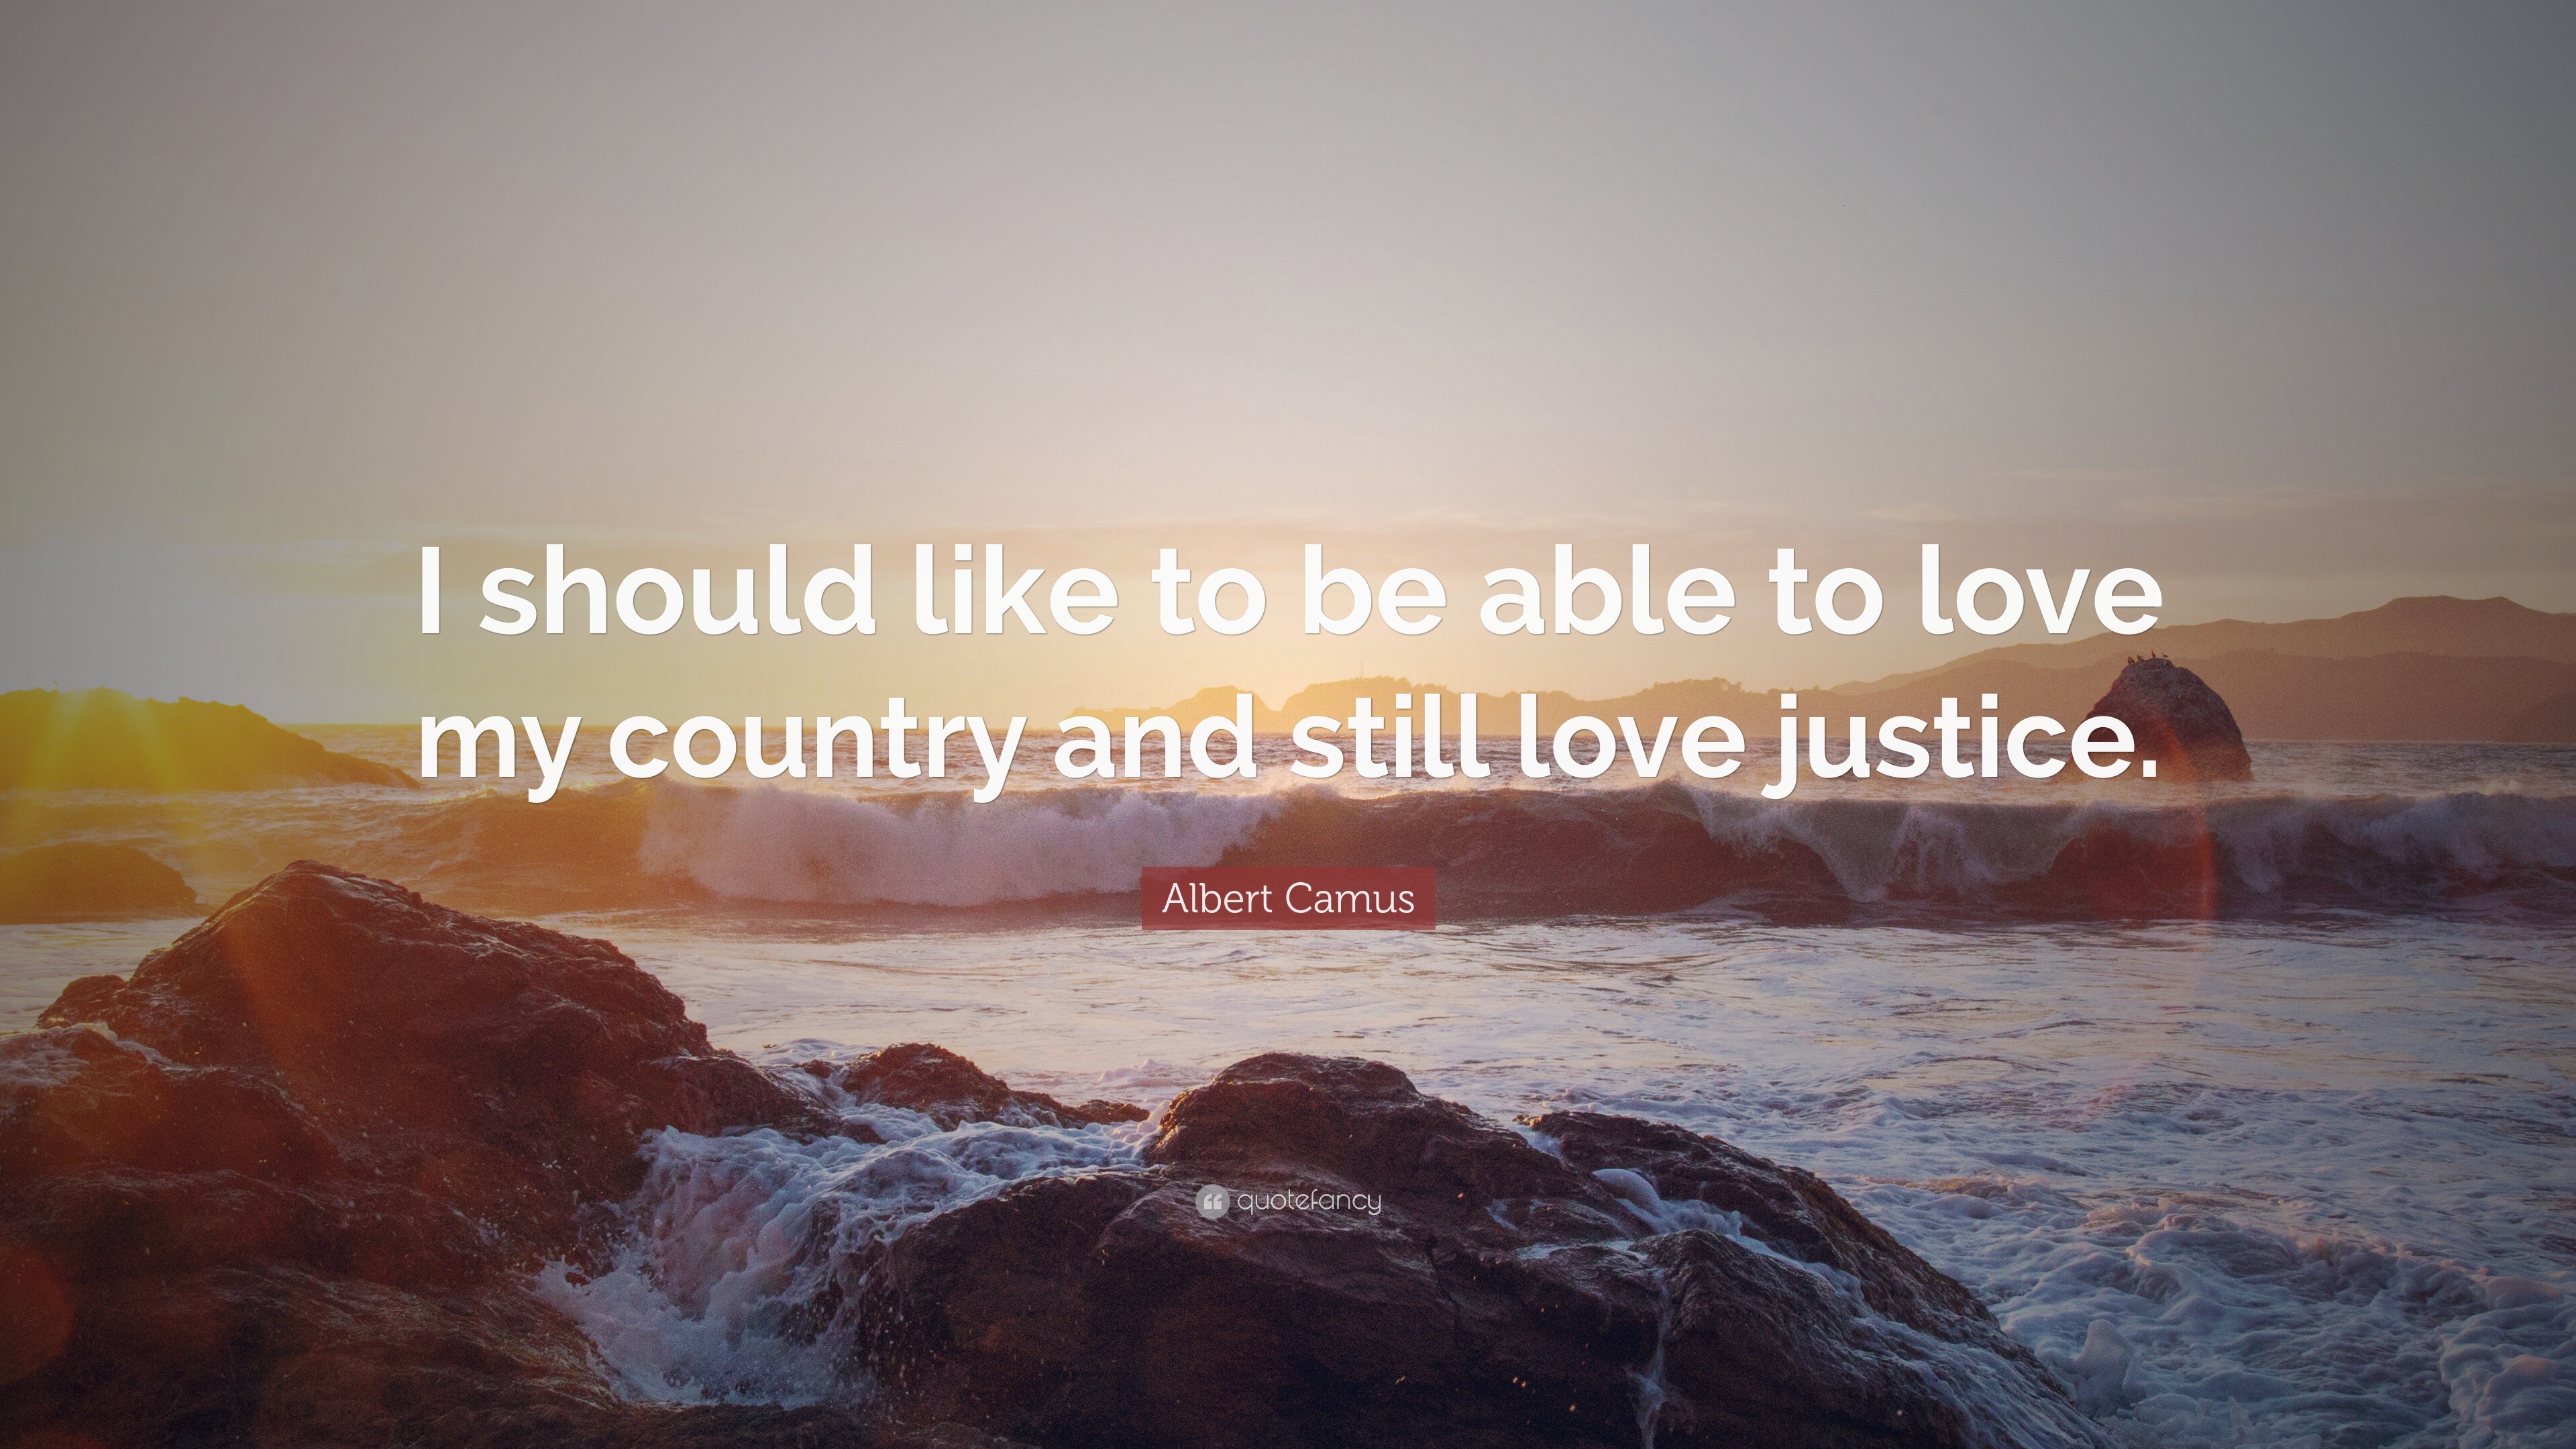 Albert Camus Quote “I should like to be able to love my country and